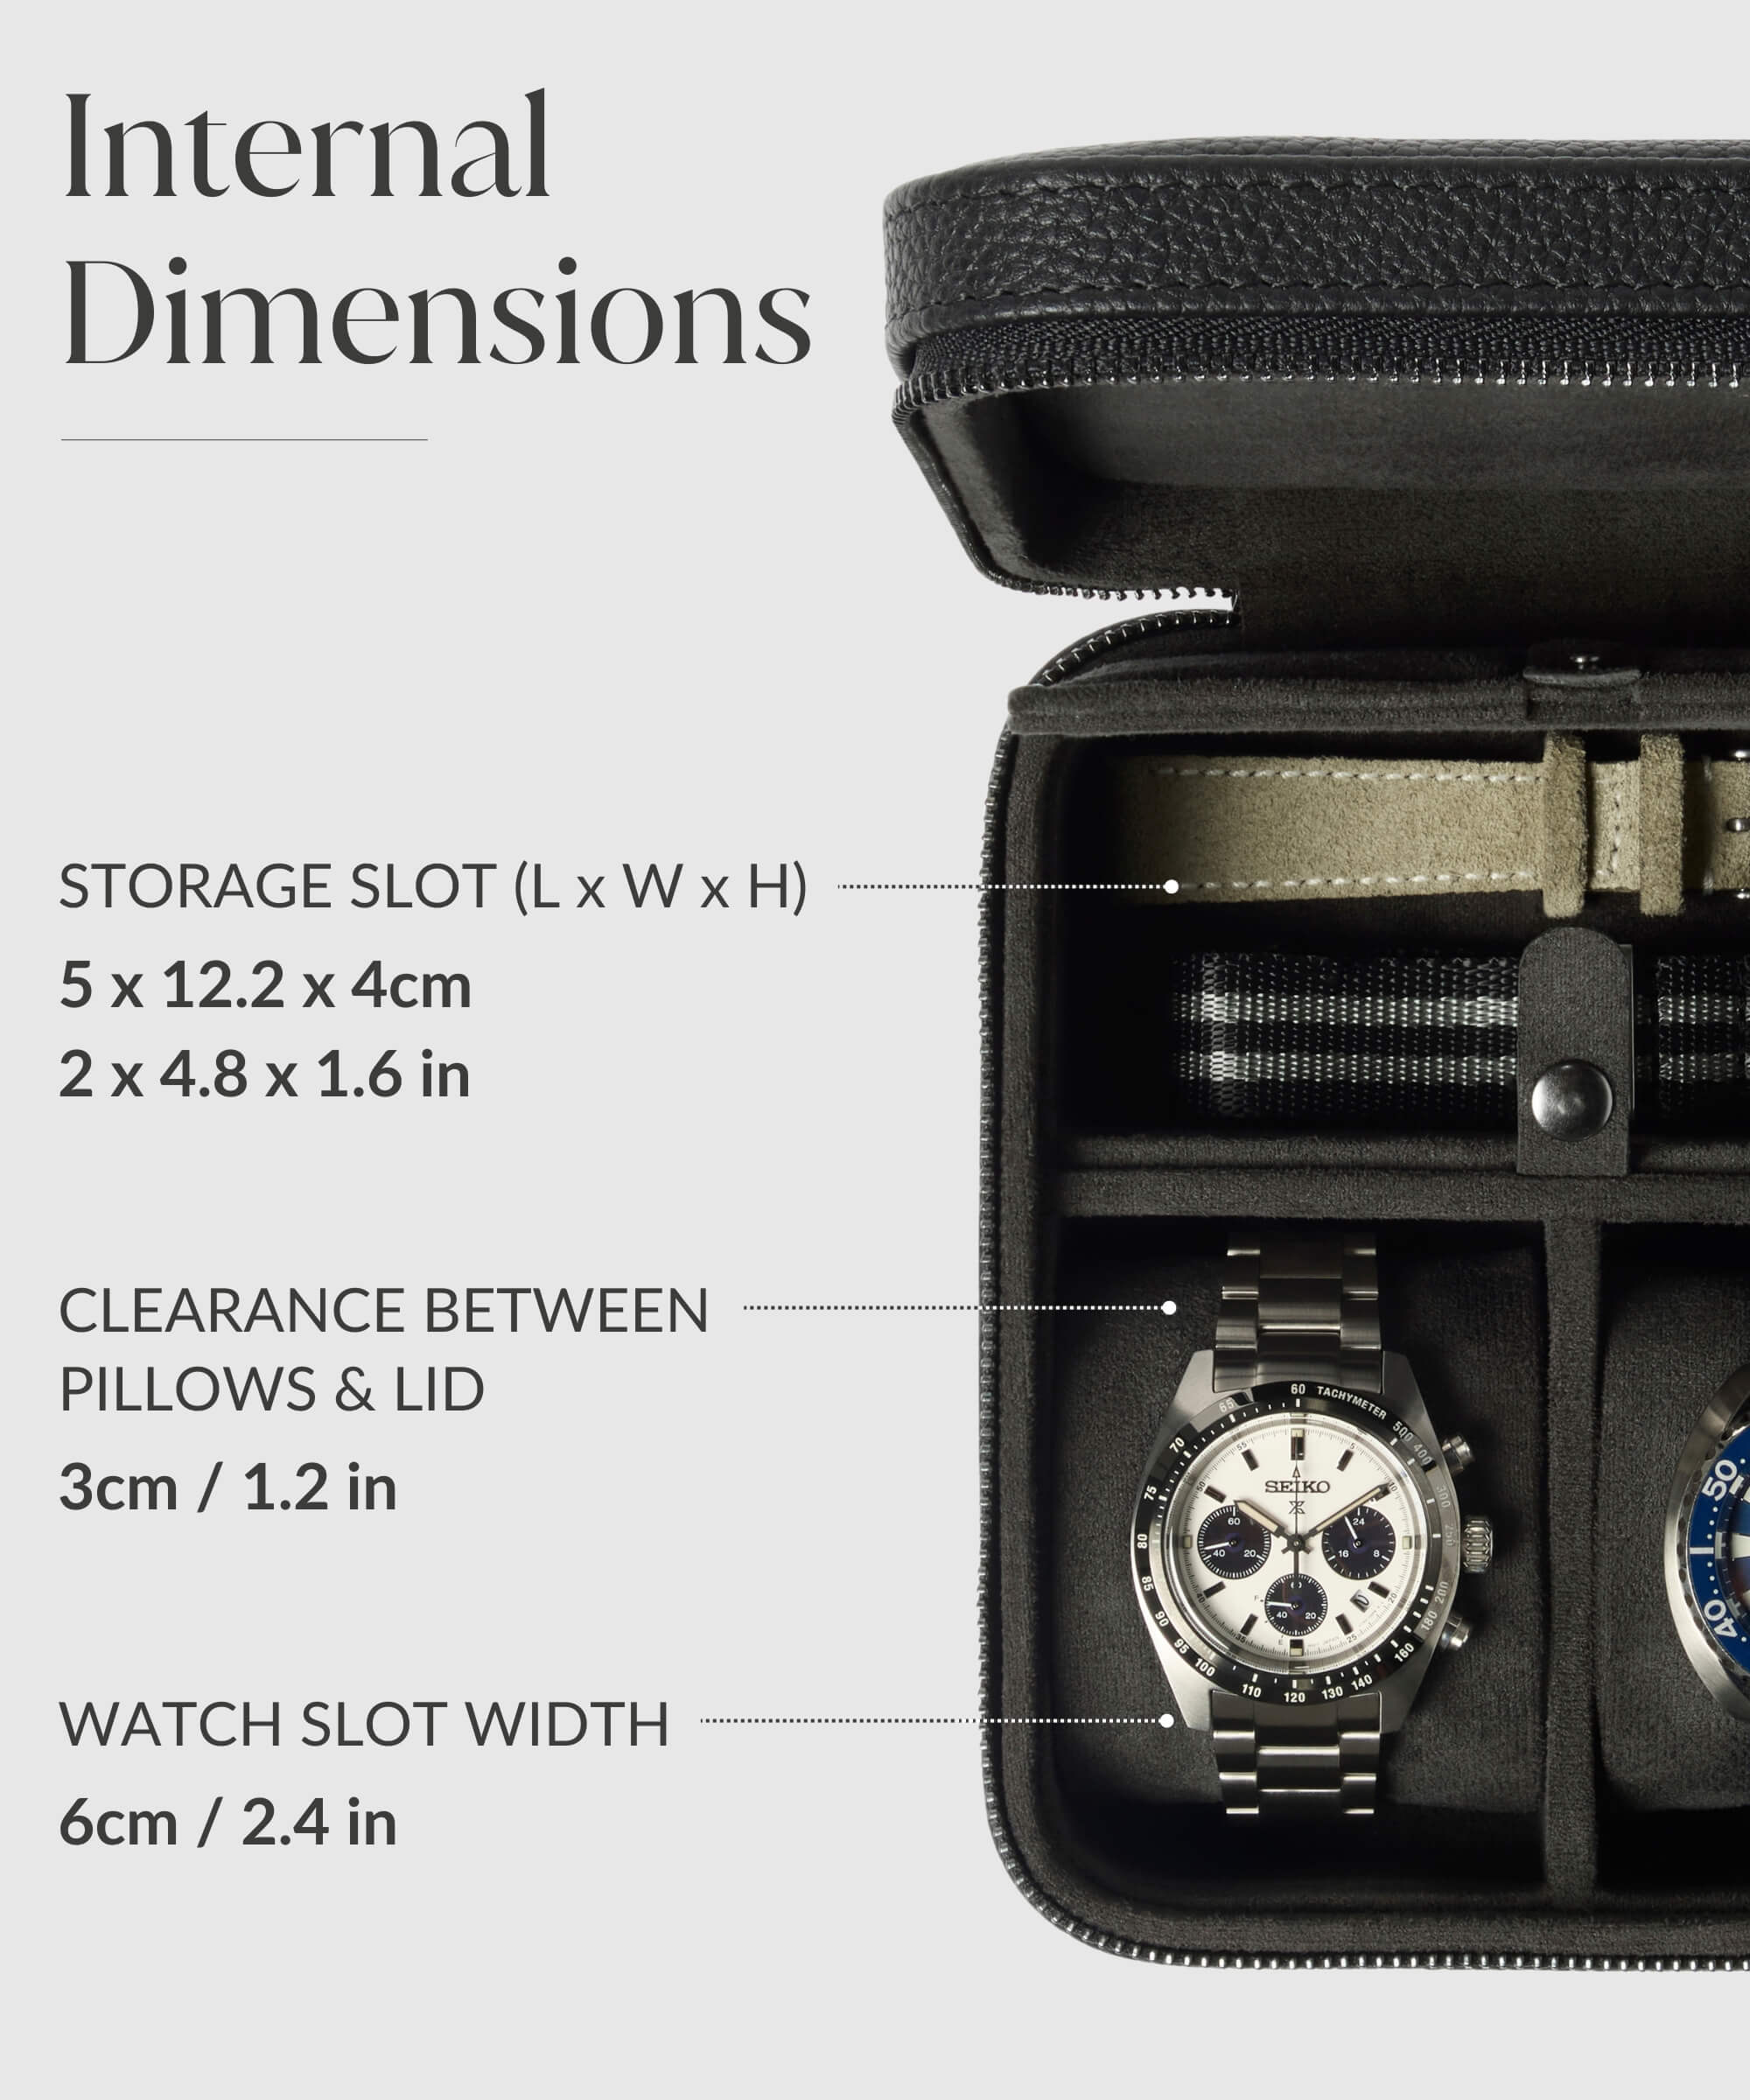 A TAWBURRY Fraser 2 Watch Travel Case with Storage - Black that provides functionality and protection for three watches inside it.